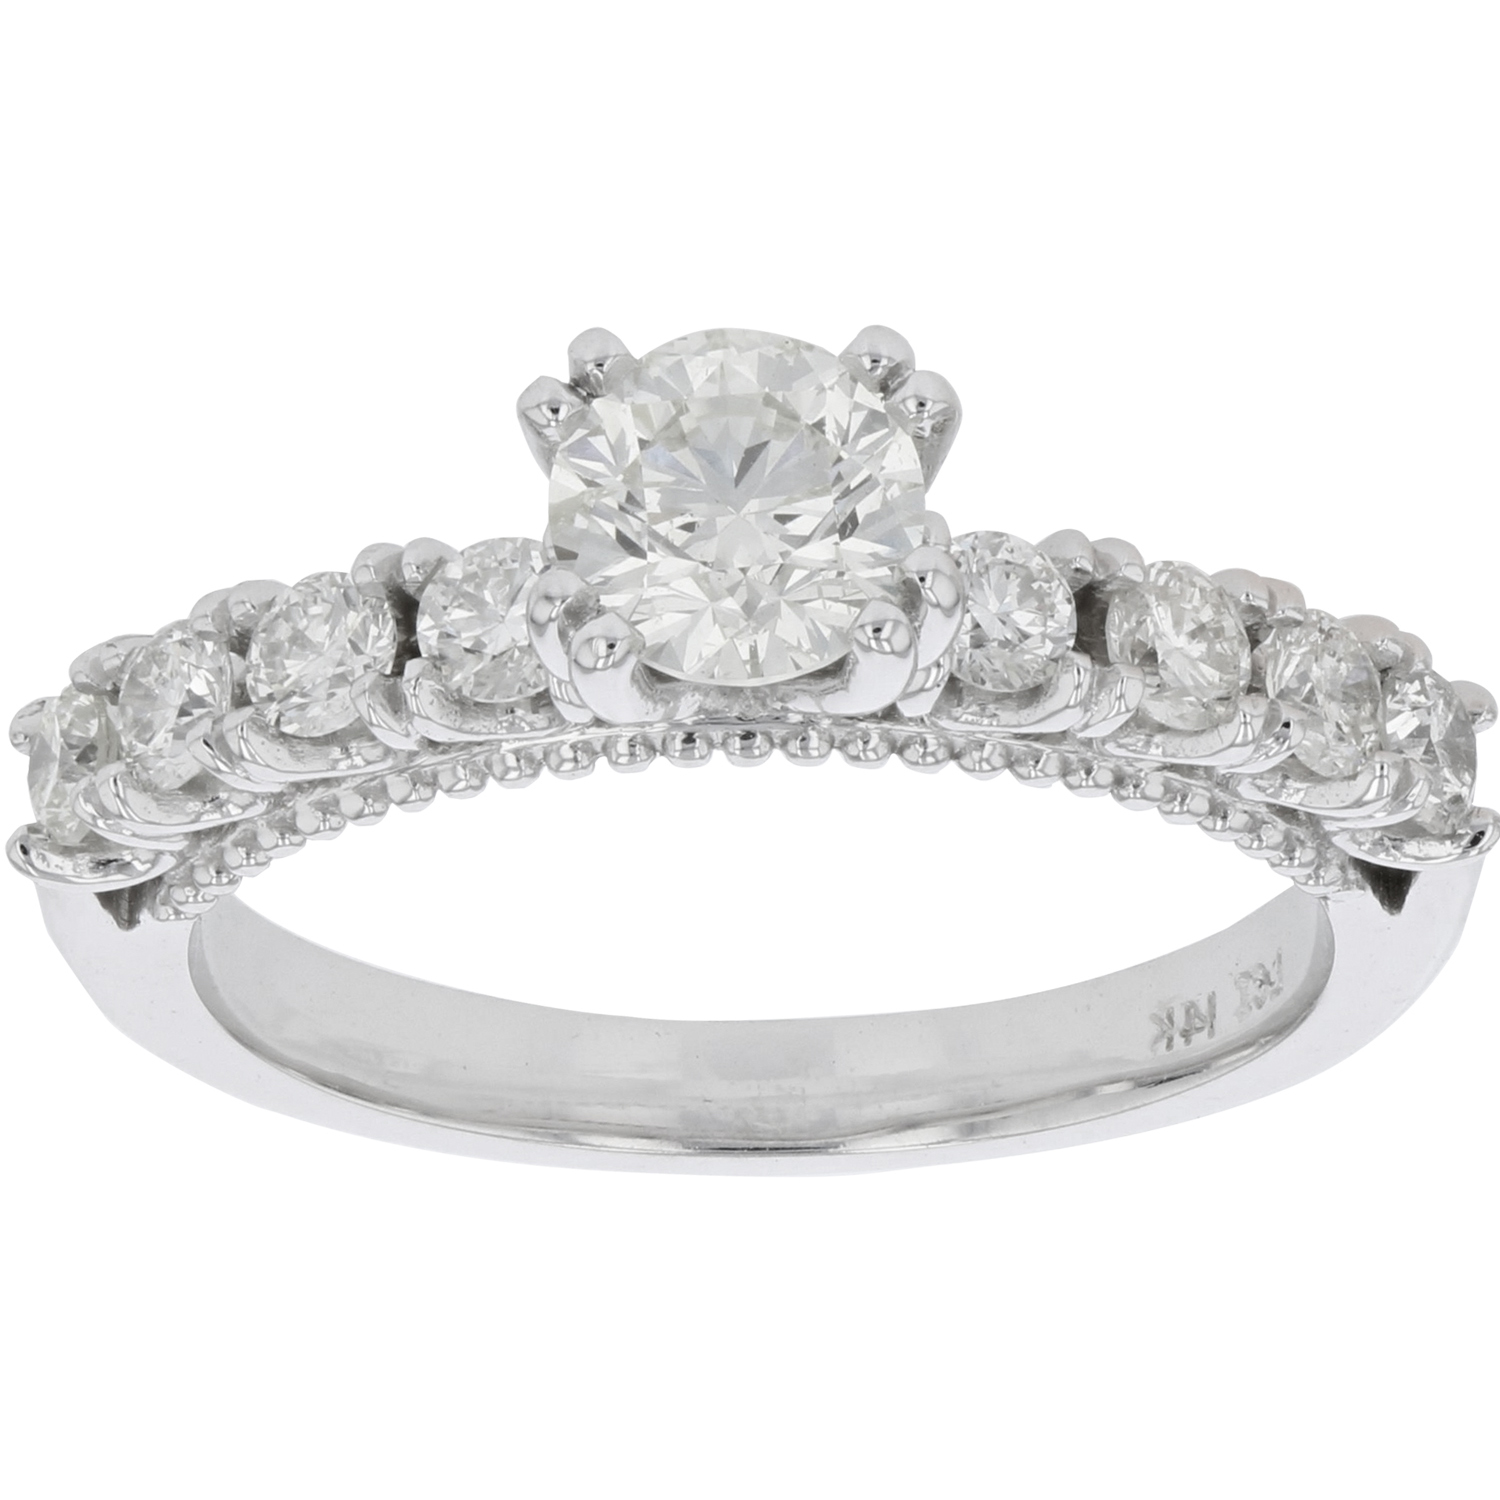 View 1.25xtw Duamond Engagement Ring in 14k White Gold